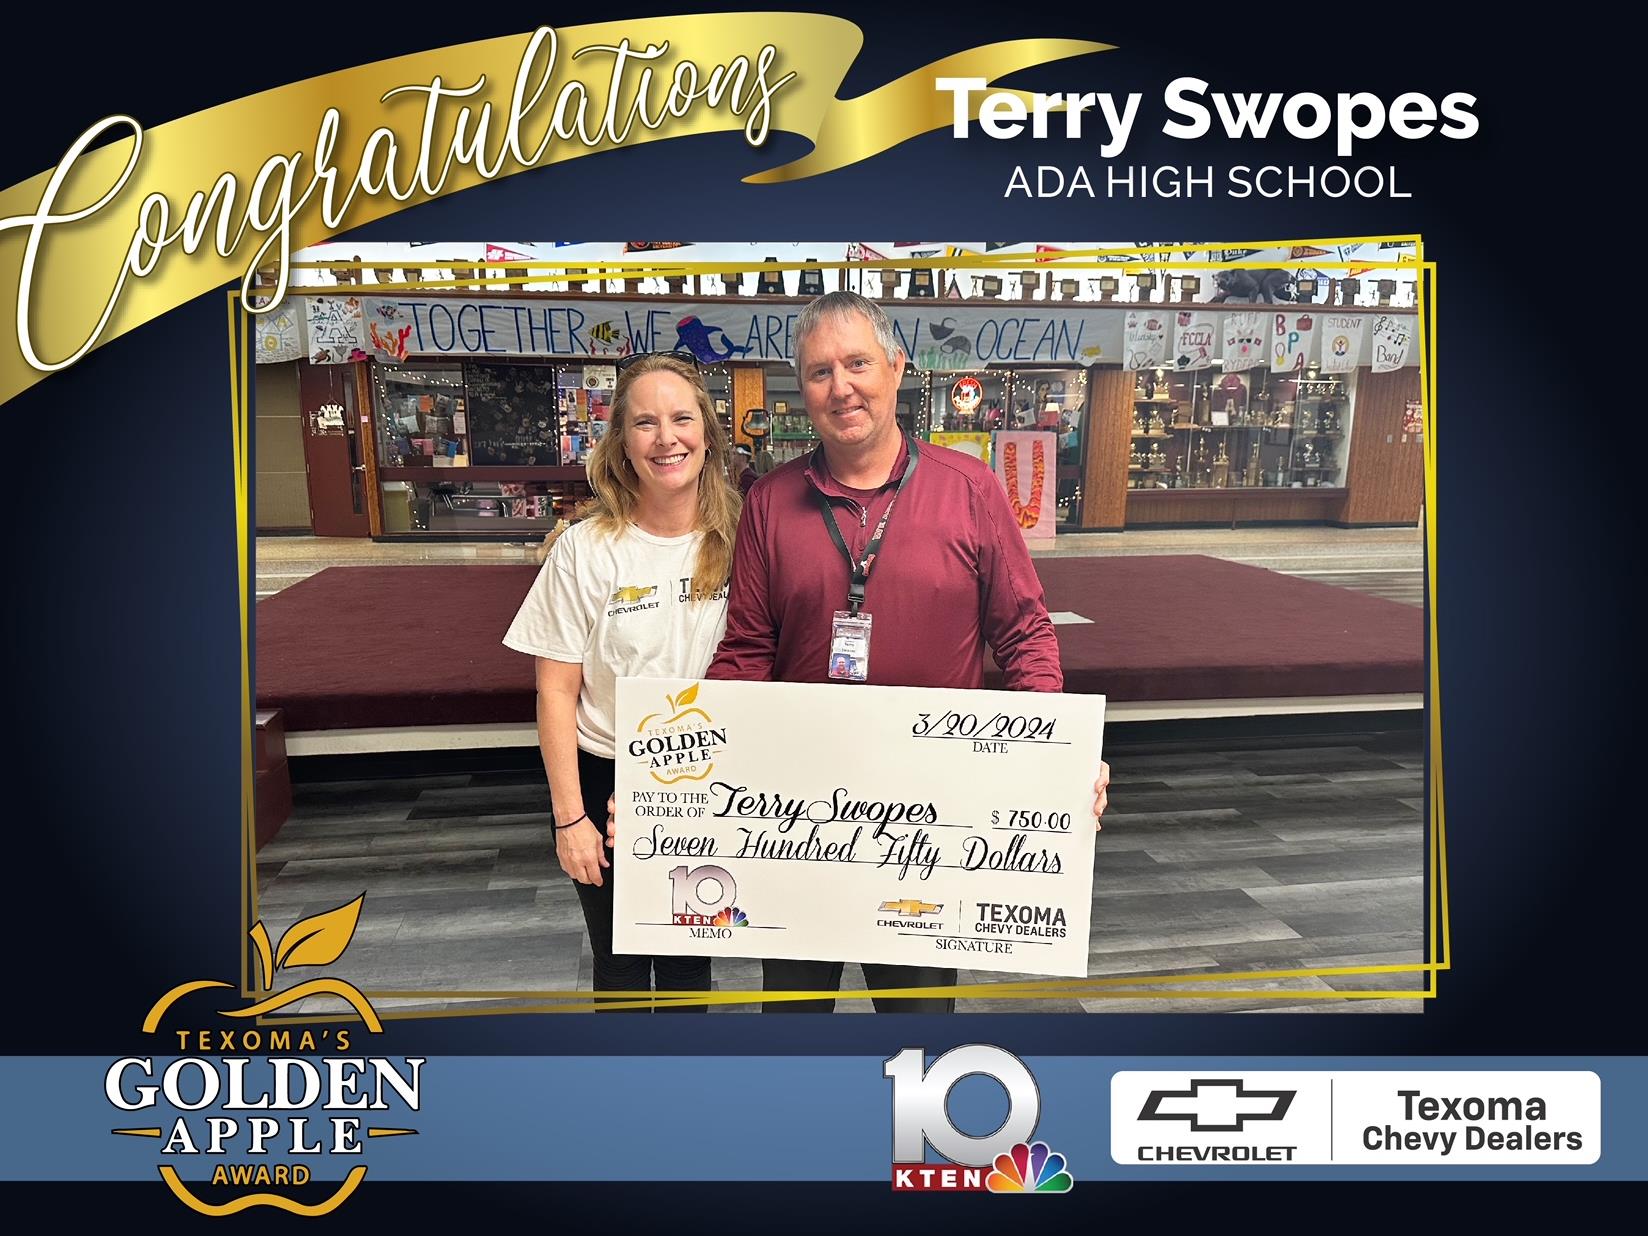 Terry Swopes receives a giant check for $750 for being Texoma's Golden Apple of the Month